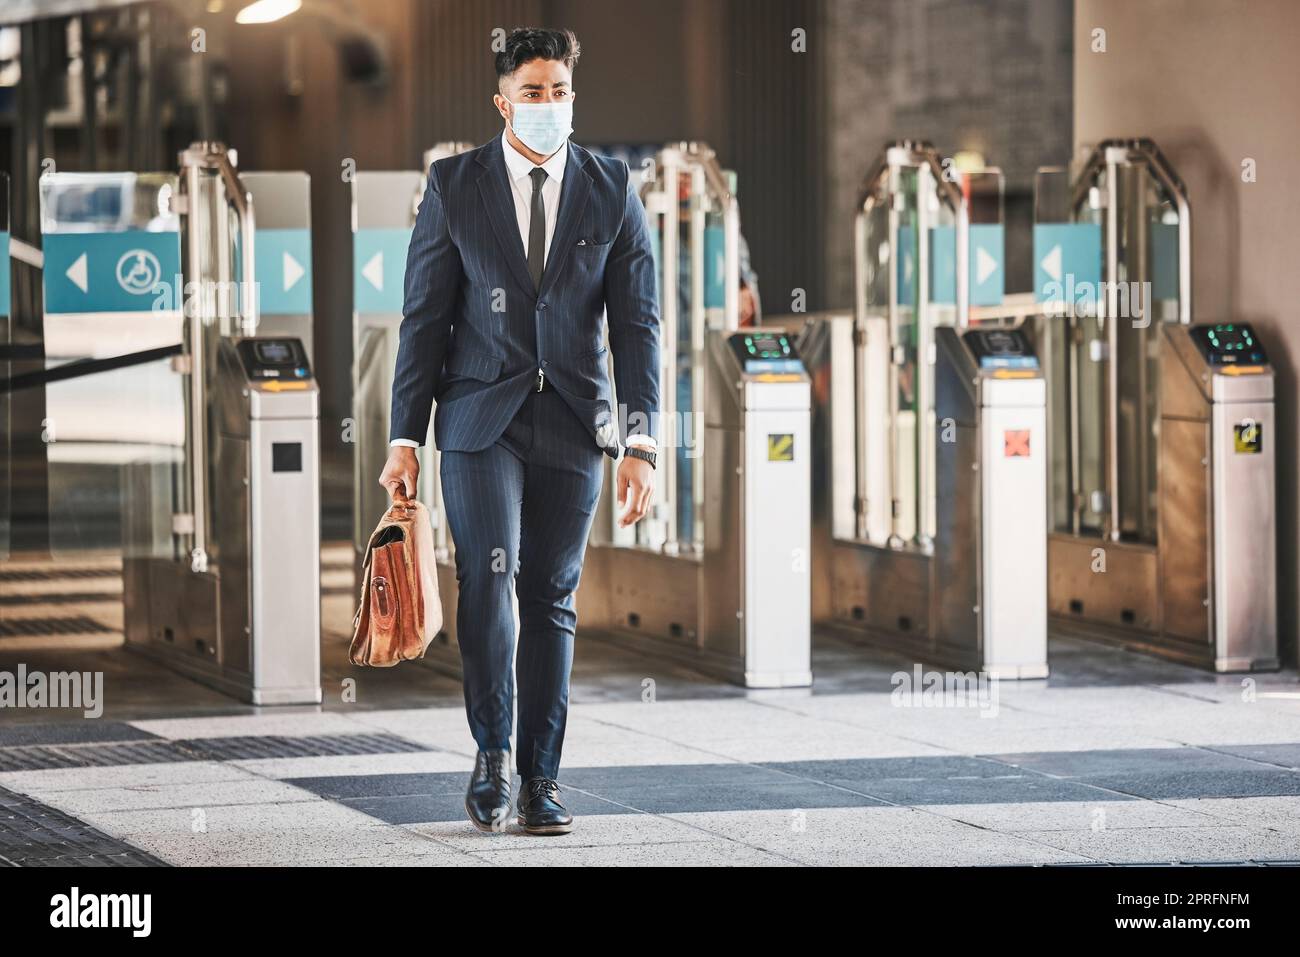 Covid, health and safety on public transport, a businessman walking in a bus or train station in a business suit and face mask. Career, travel and an office worker on his morning journey in the city. Stock Photo